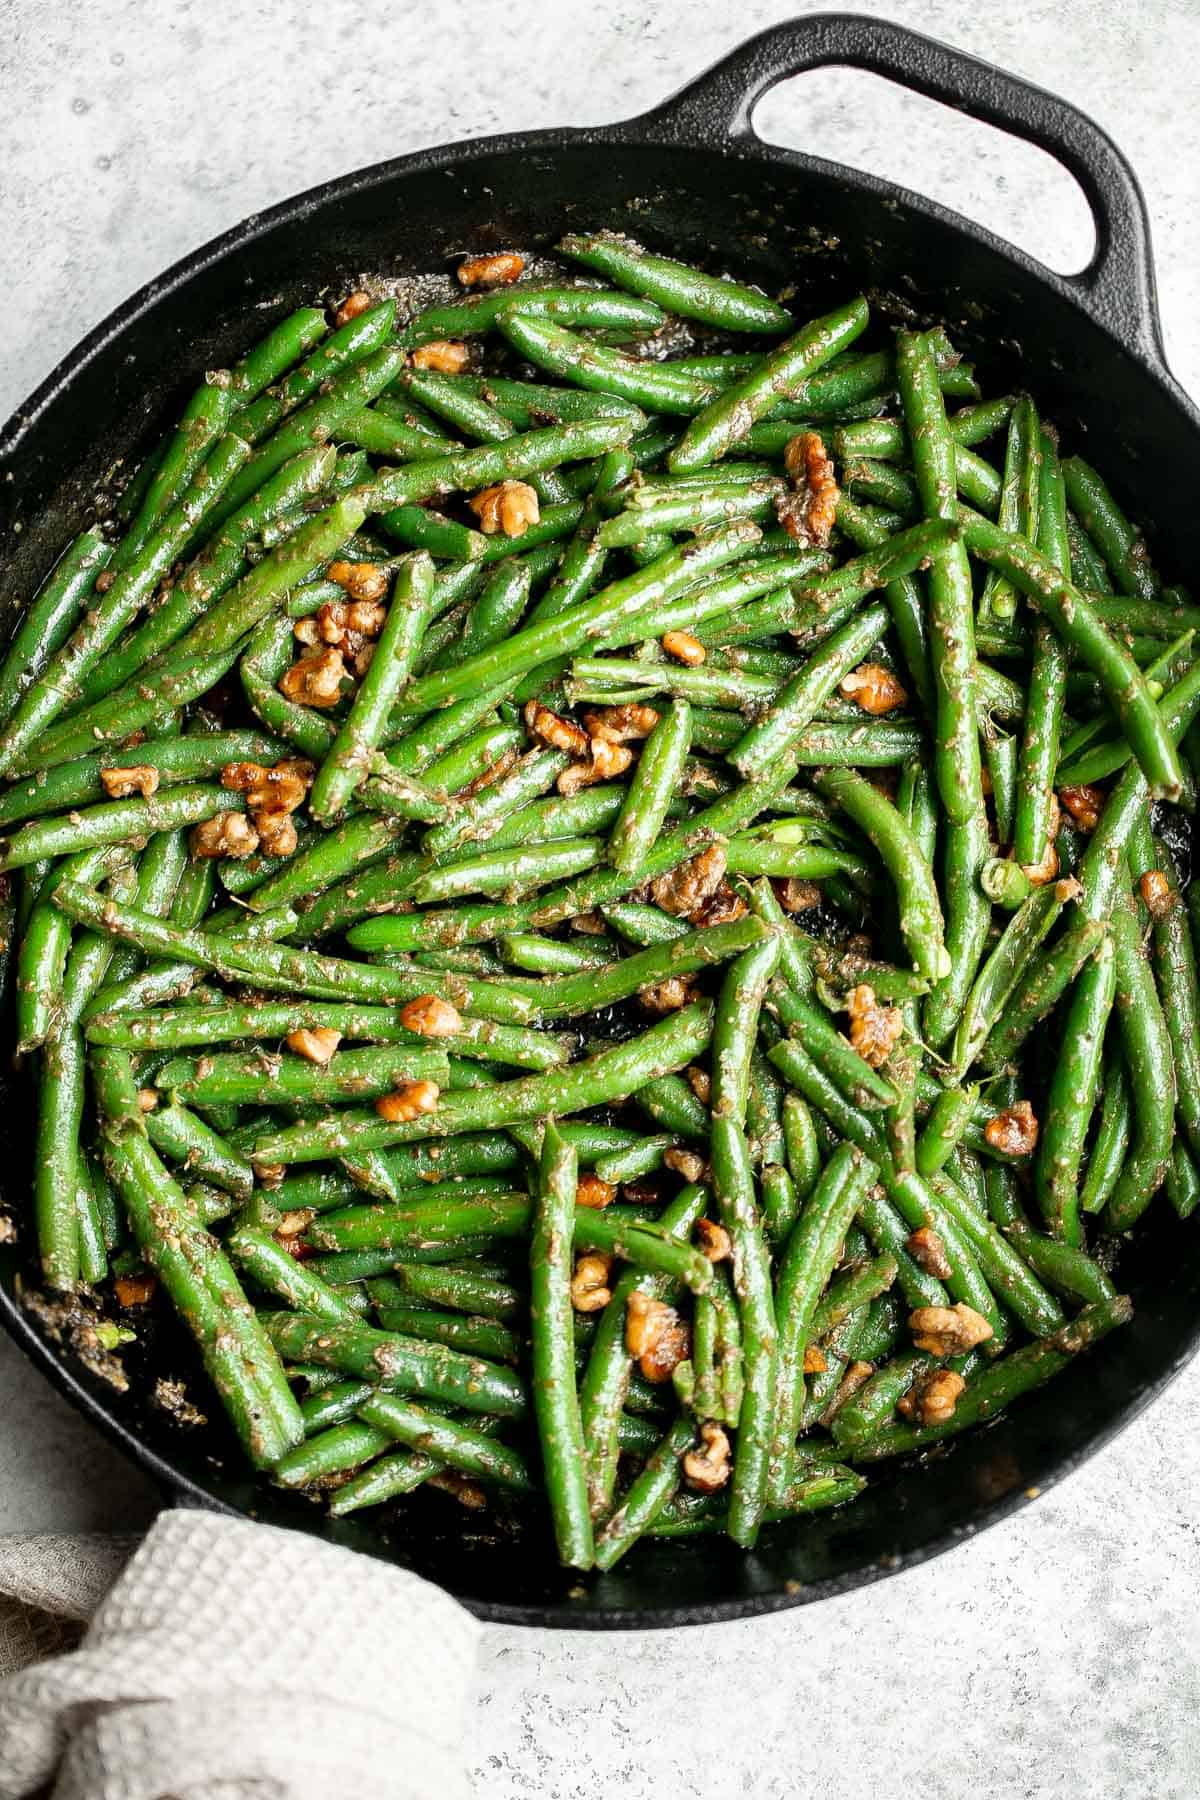 Pesto green beans is a simple side dish that is quick and easy to make in under 10 minutes, tossed in buttery toasted walnuts and pesto. So delicious. | aheadofthyme.com